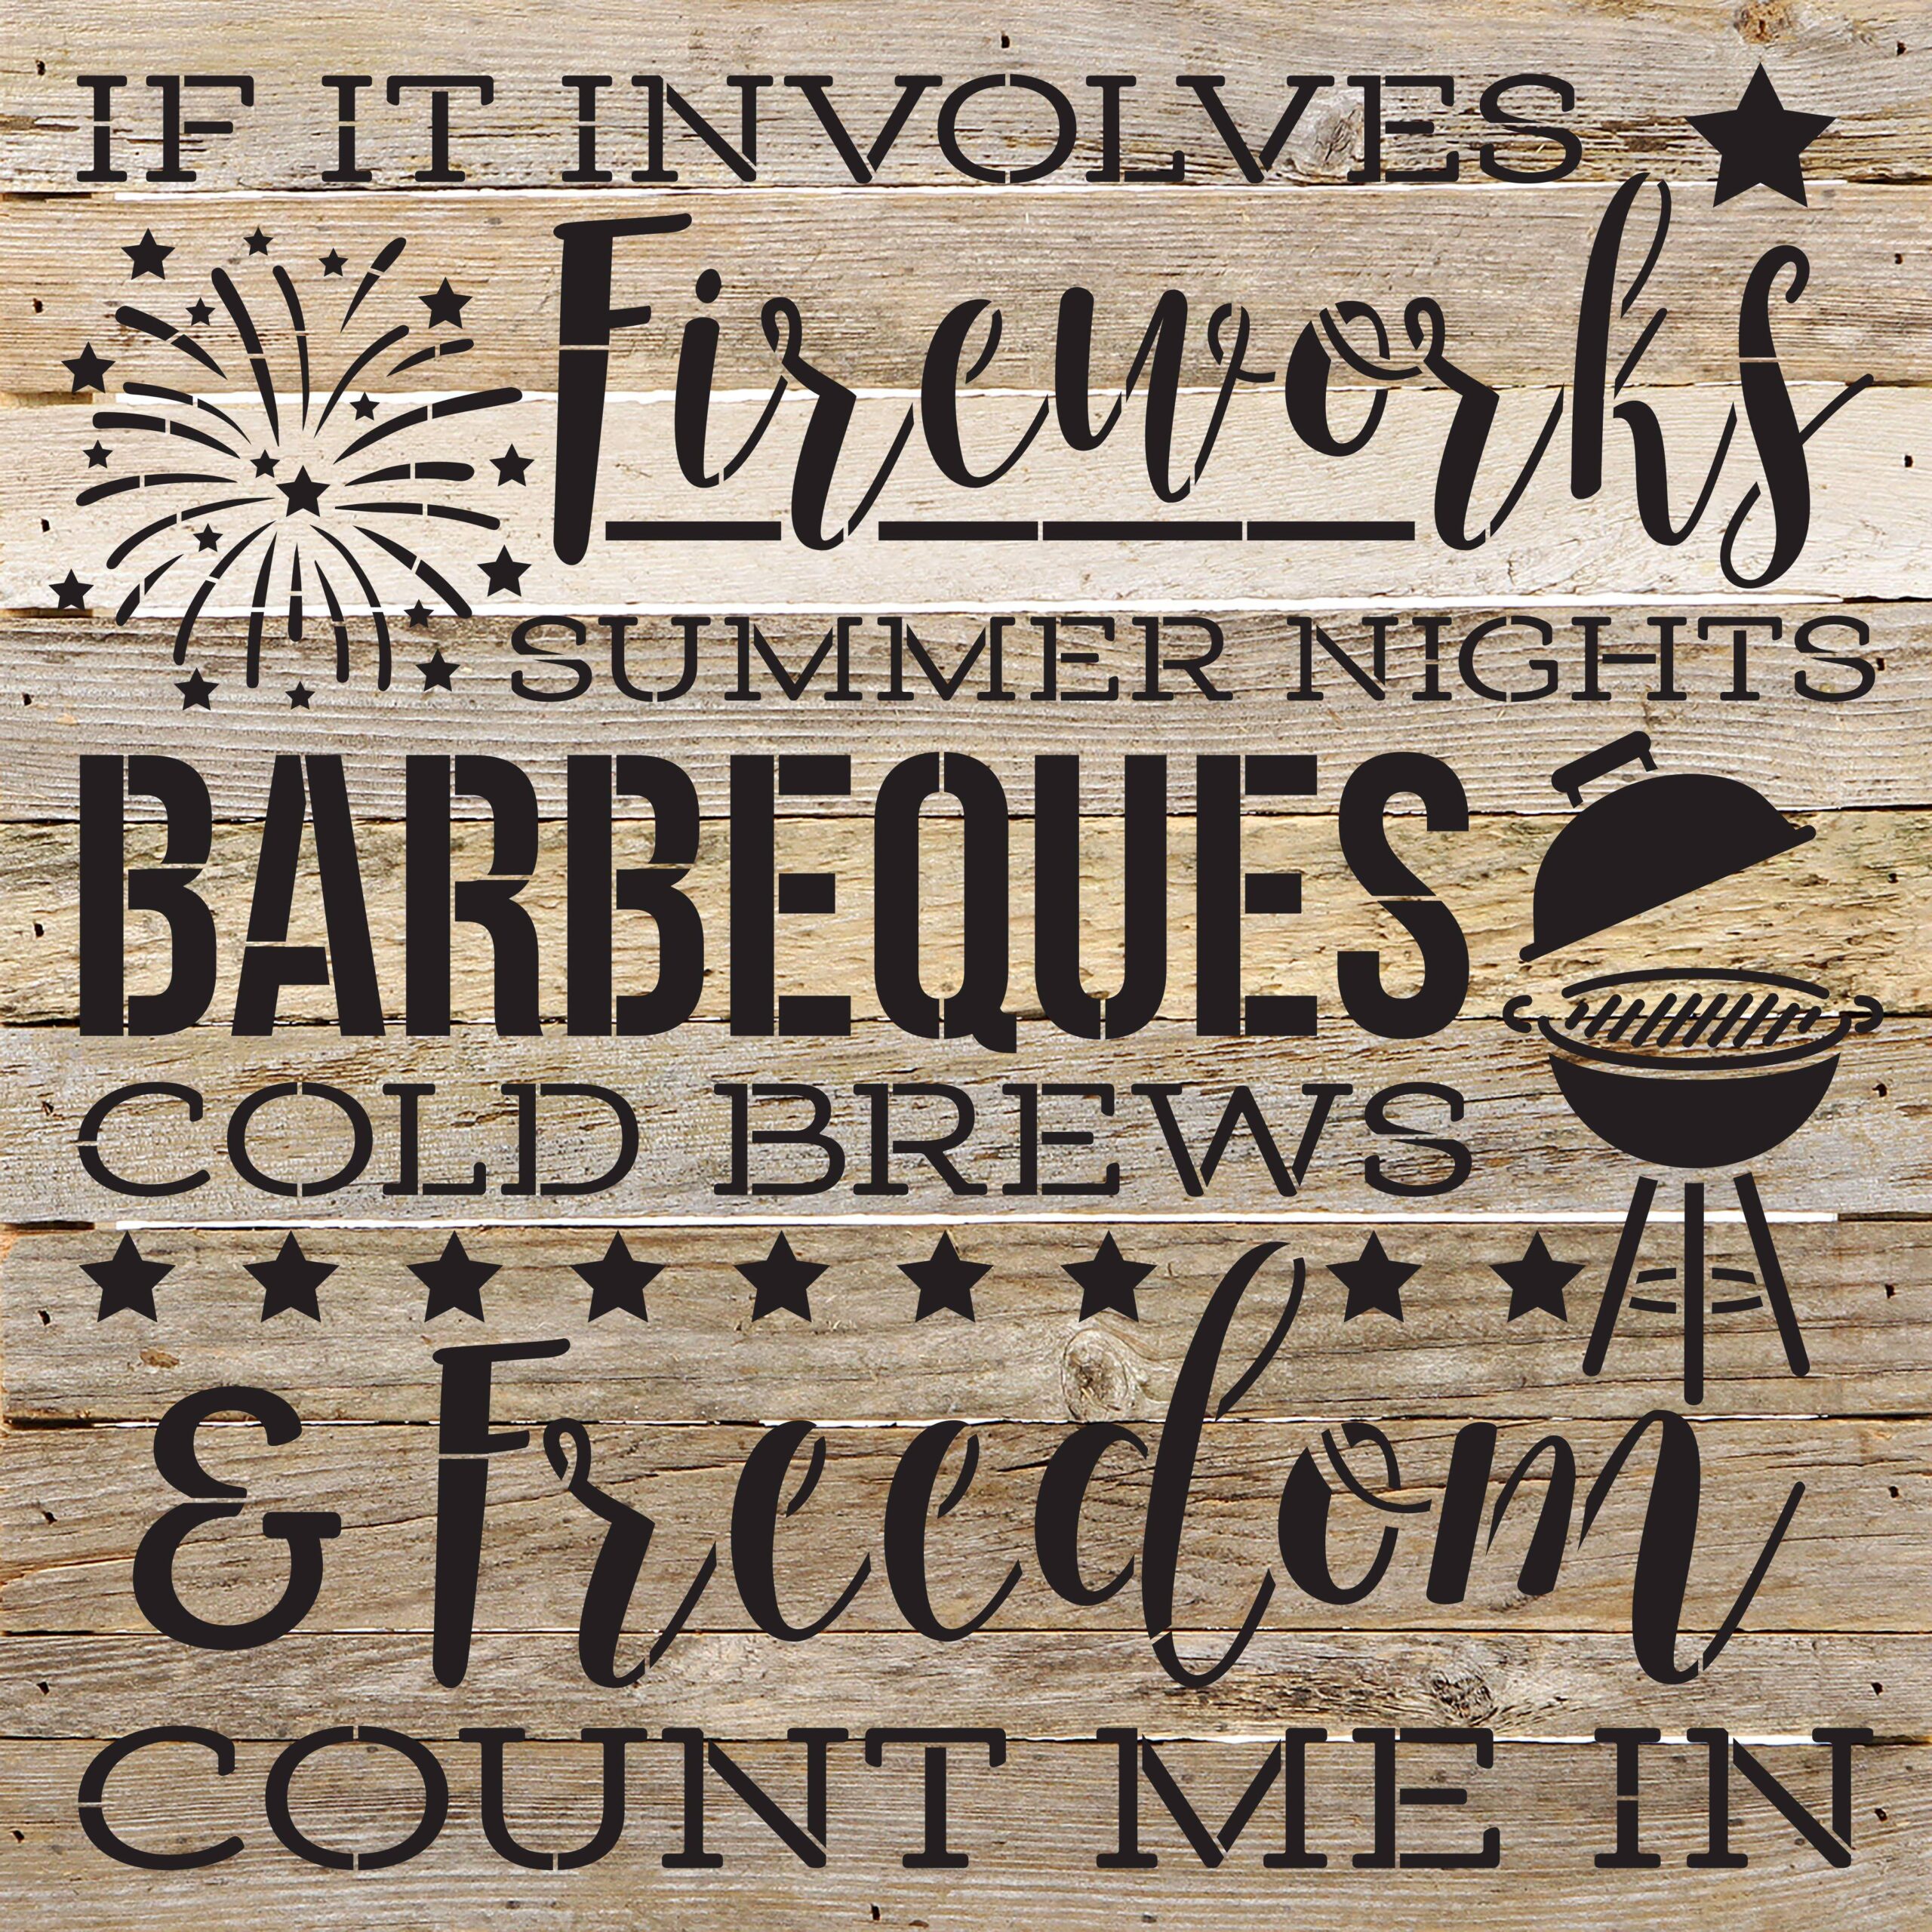 If it involves fireworks summer nights barbeques cold brews and freedom count me in / 28"X28" Reclaimed Wood Sign